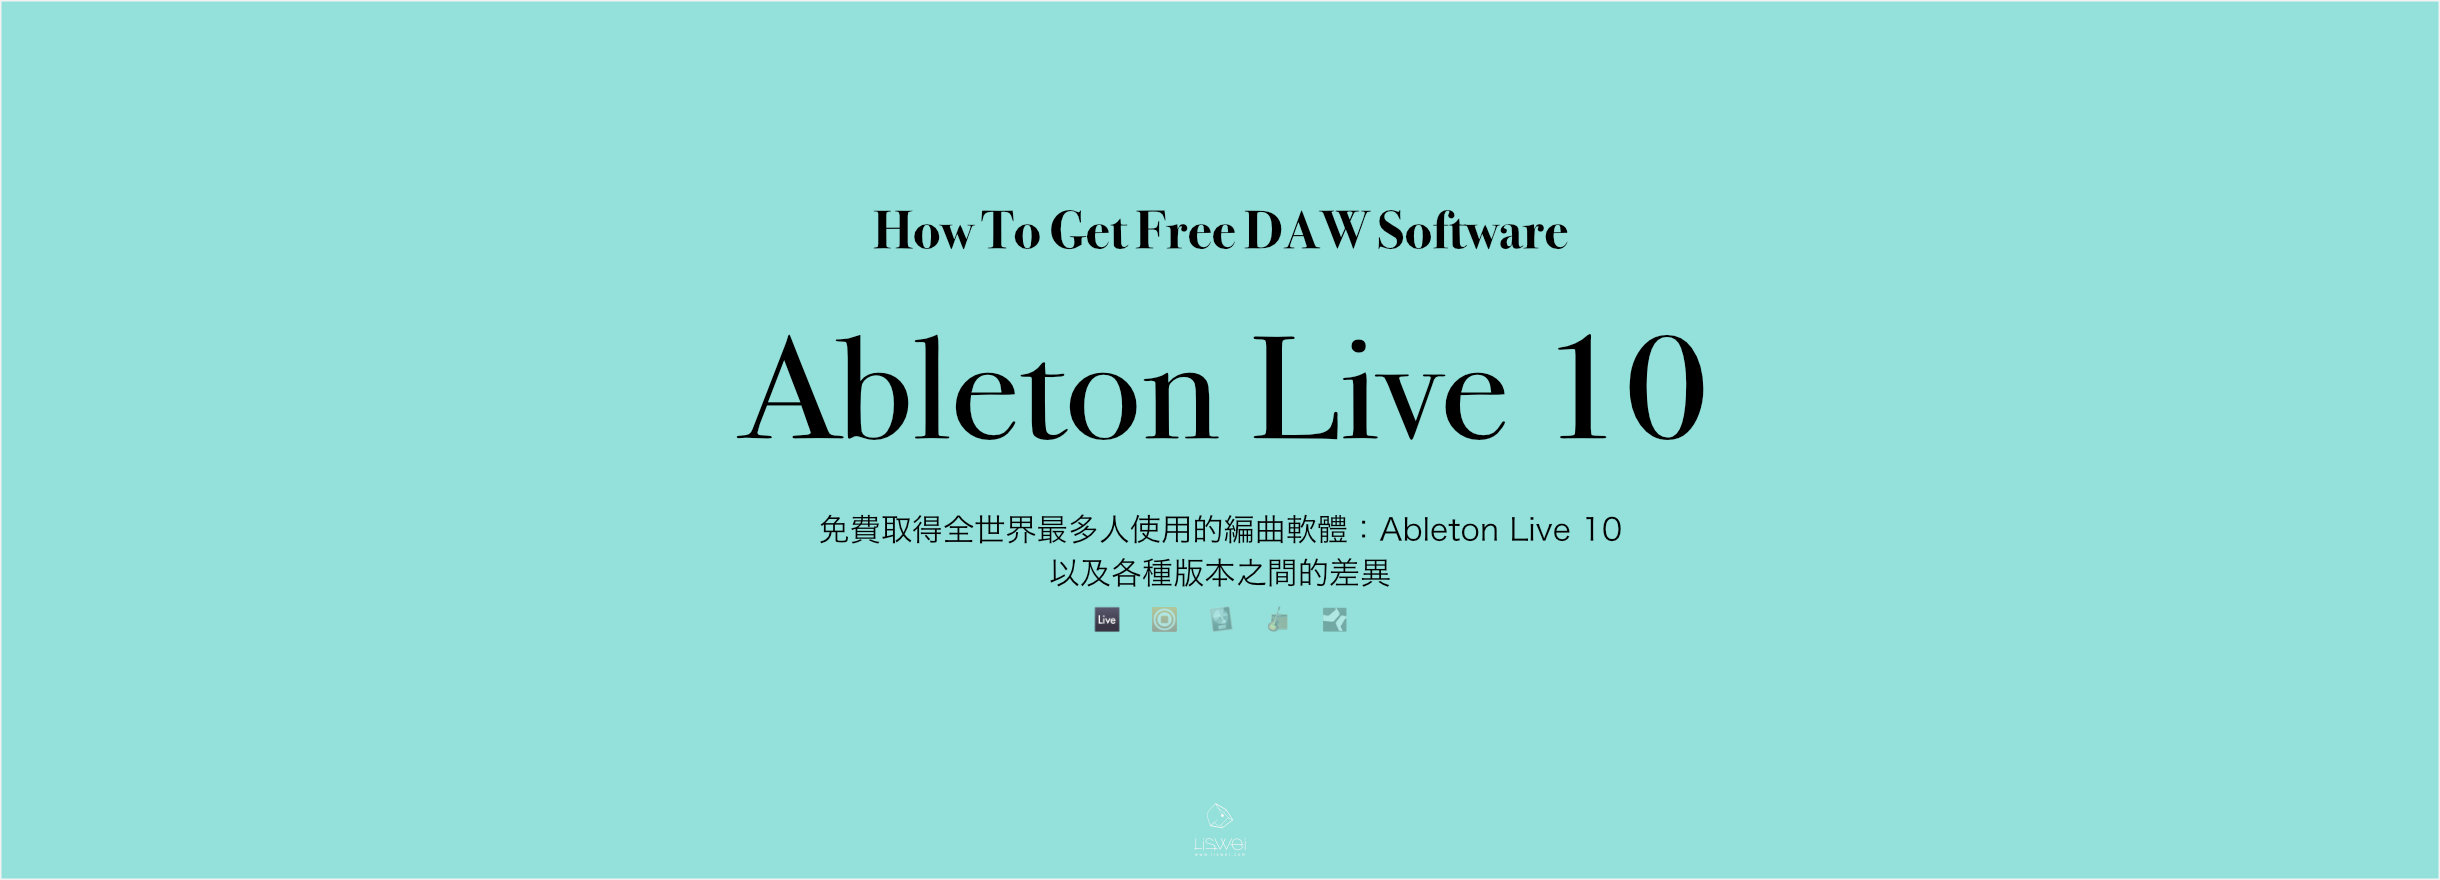 how-to-get-free-ableton-live-software